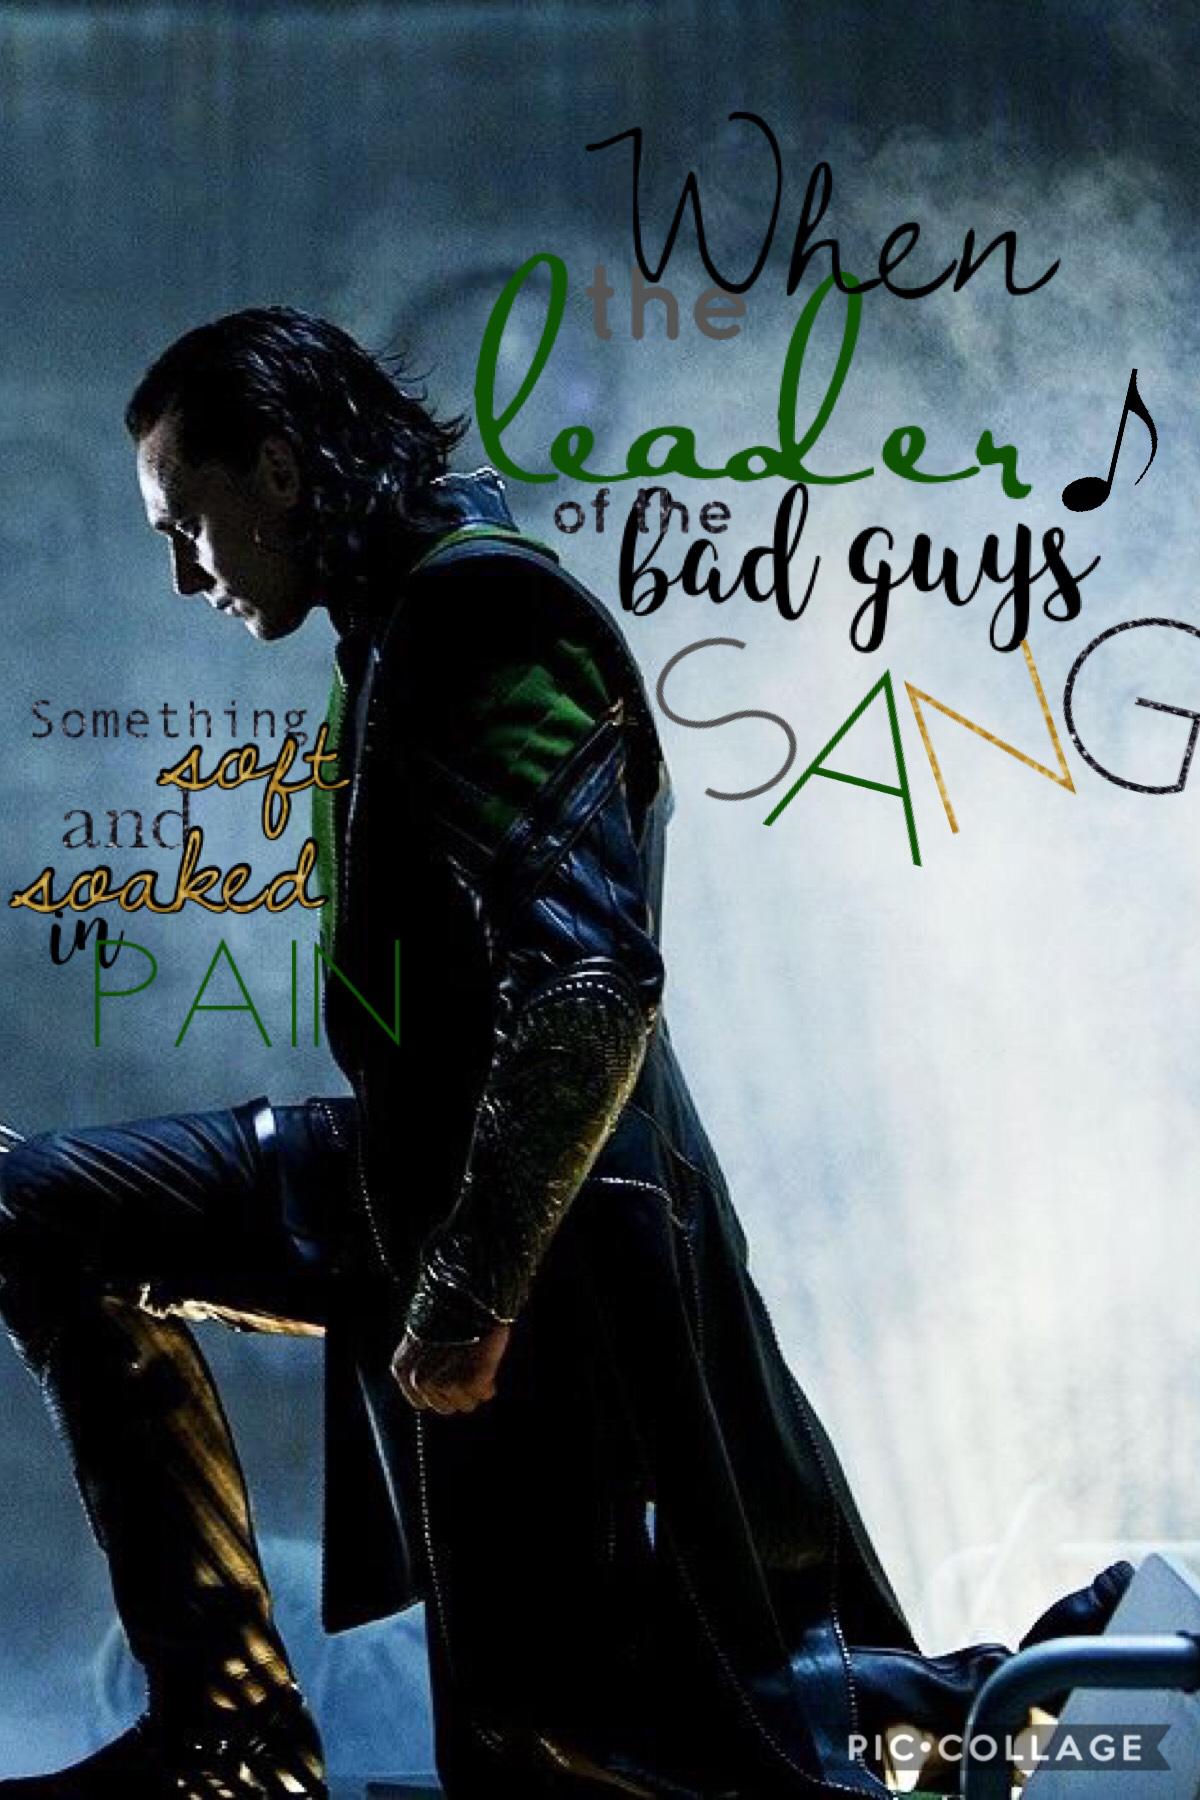 -The Judge, by Twenty one Pilots. (Tap)
This song is amazing if you haven’t listened to it you really should! Loki has been through so so much pain and I think this song really suits him! I hope you like it!